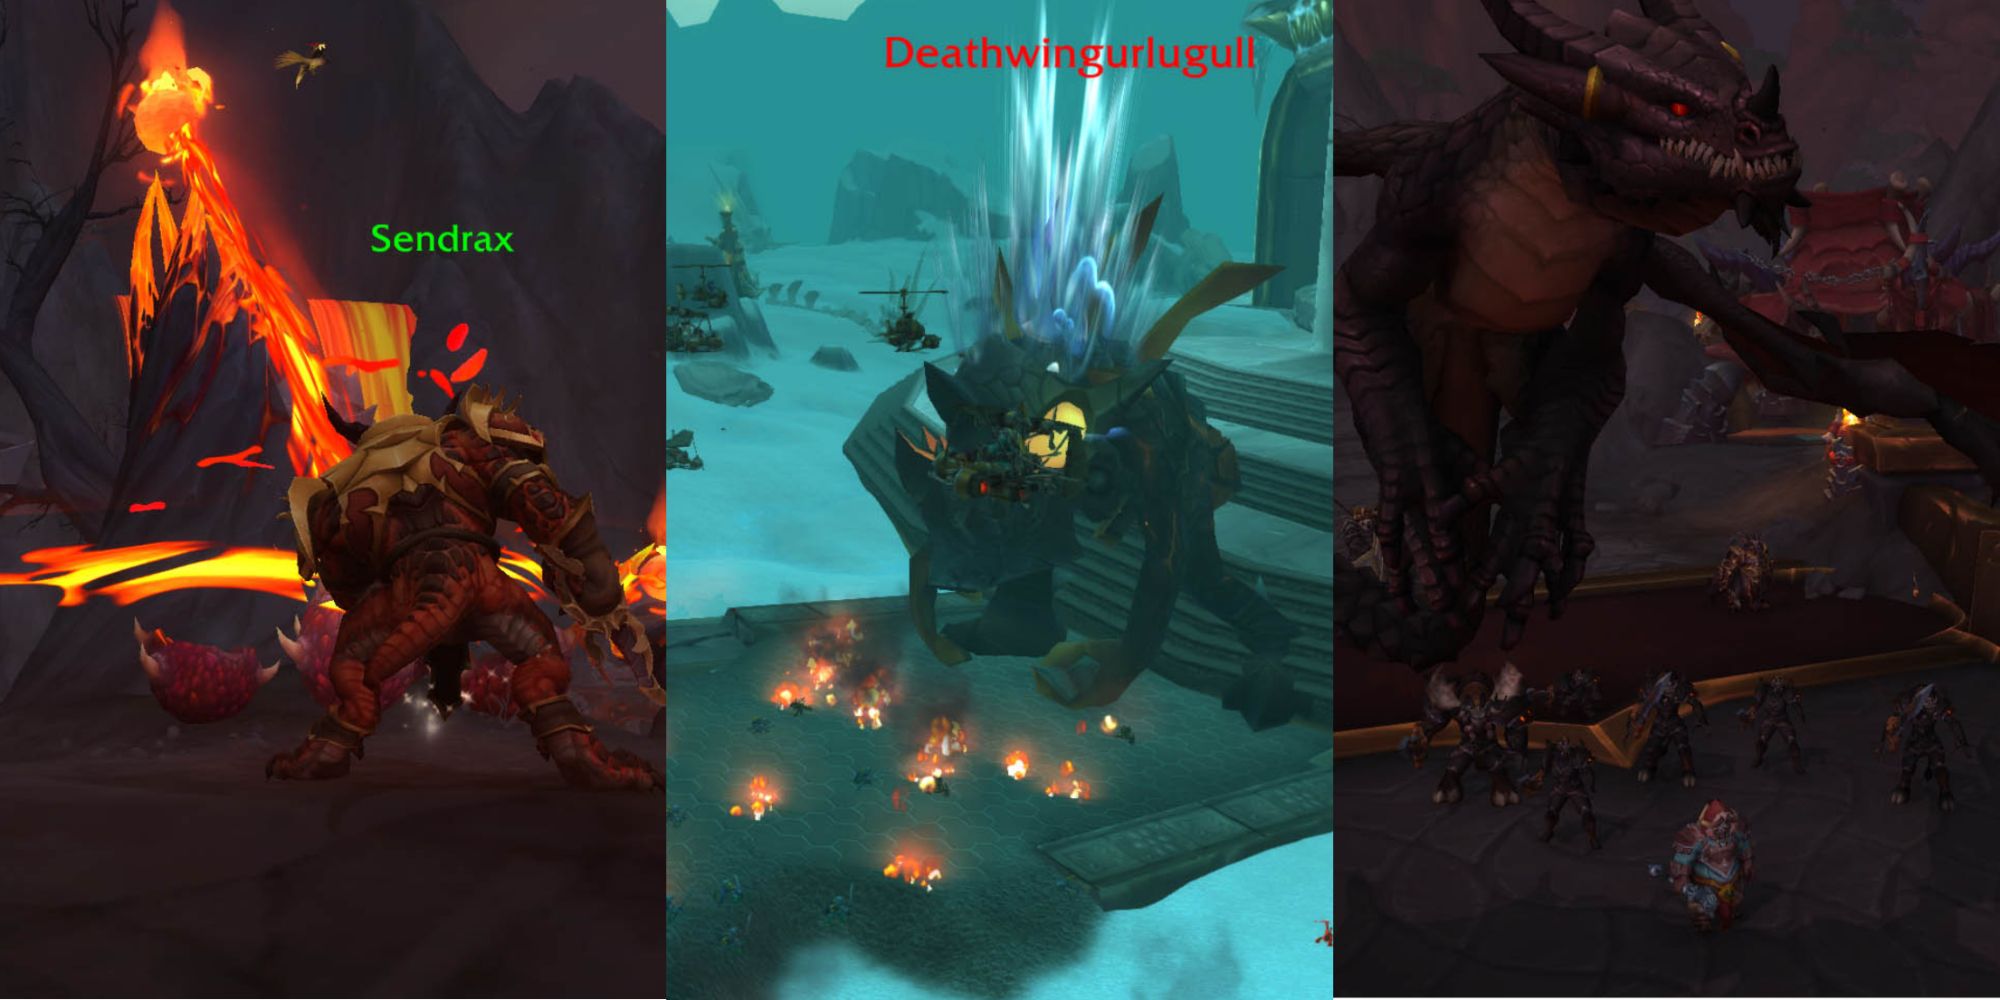 World of Warcraft: collage of Sendrax, deathwing murloc, and a black dragon